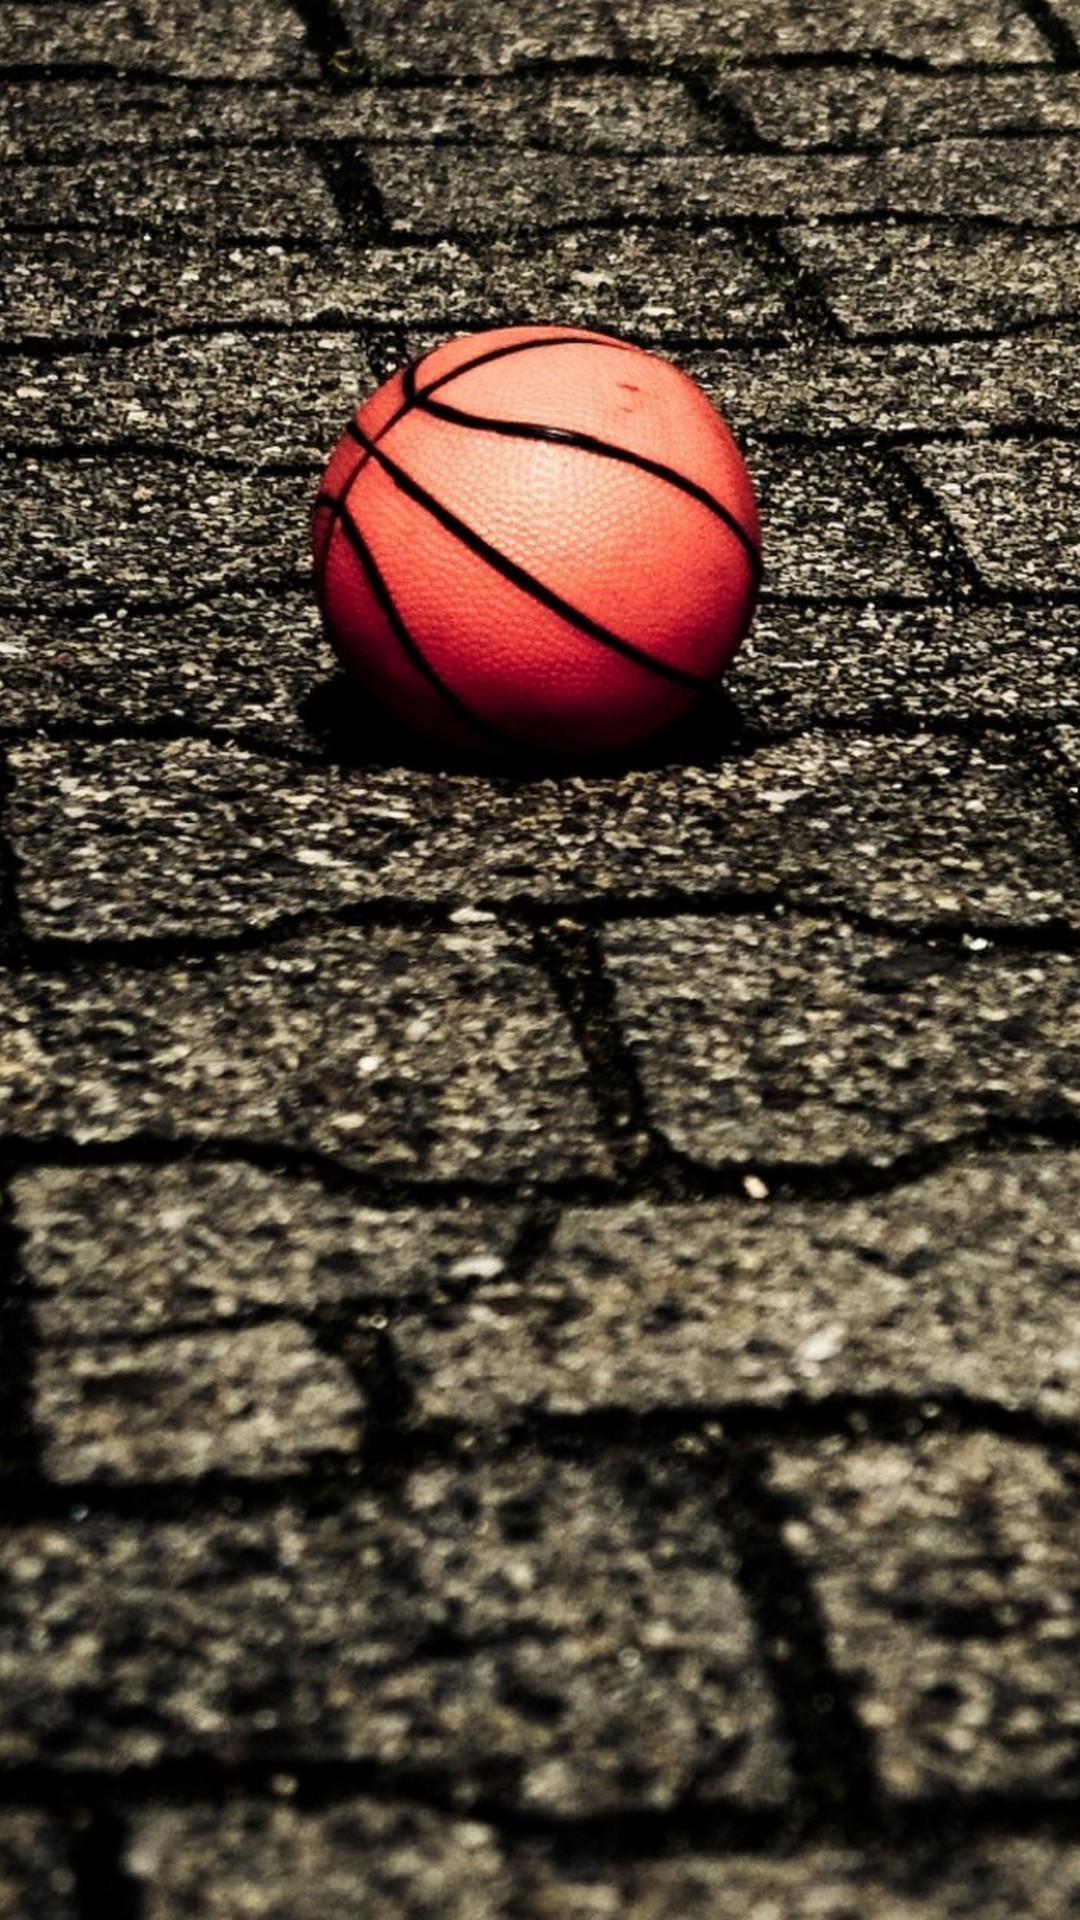 Basketball Wallpaper iPhone HD with image dimensions 1080x1920 pixel. You can make this wallpaper for your Desktop Computer Backgrounds, Windows or Mac Screensavers, iPhone Lock screen, Tablet or Android and another Mobile Phone device